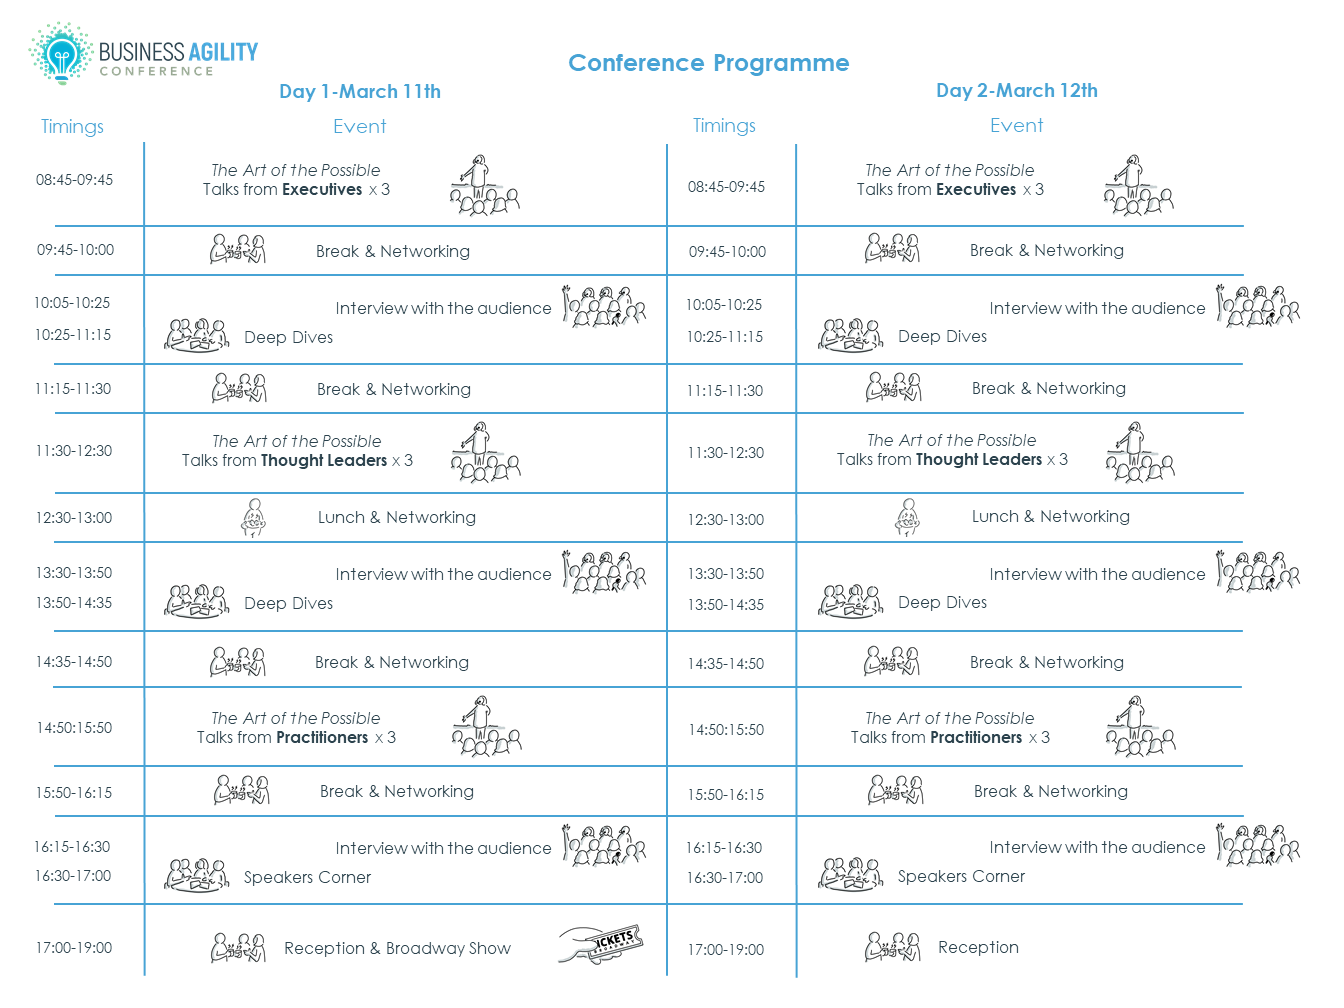 Business Agility Conference Programme in Picture